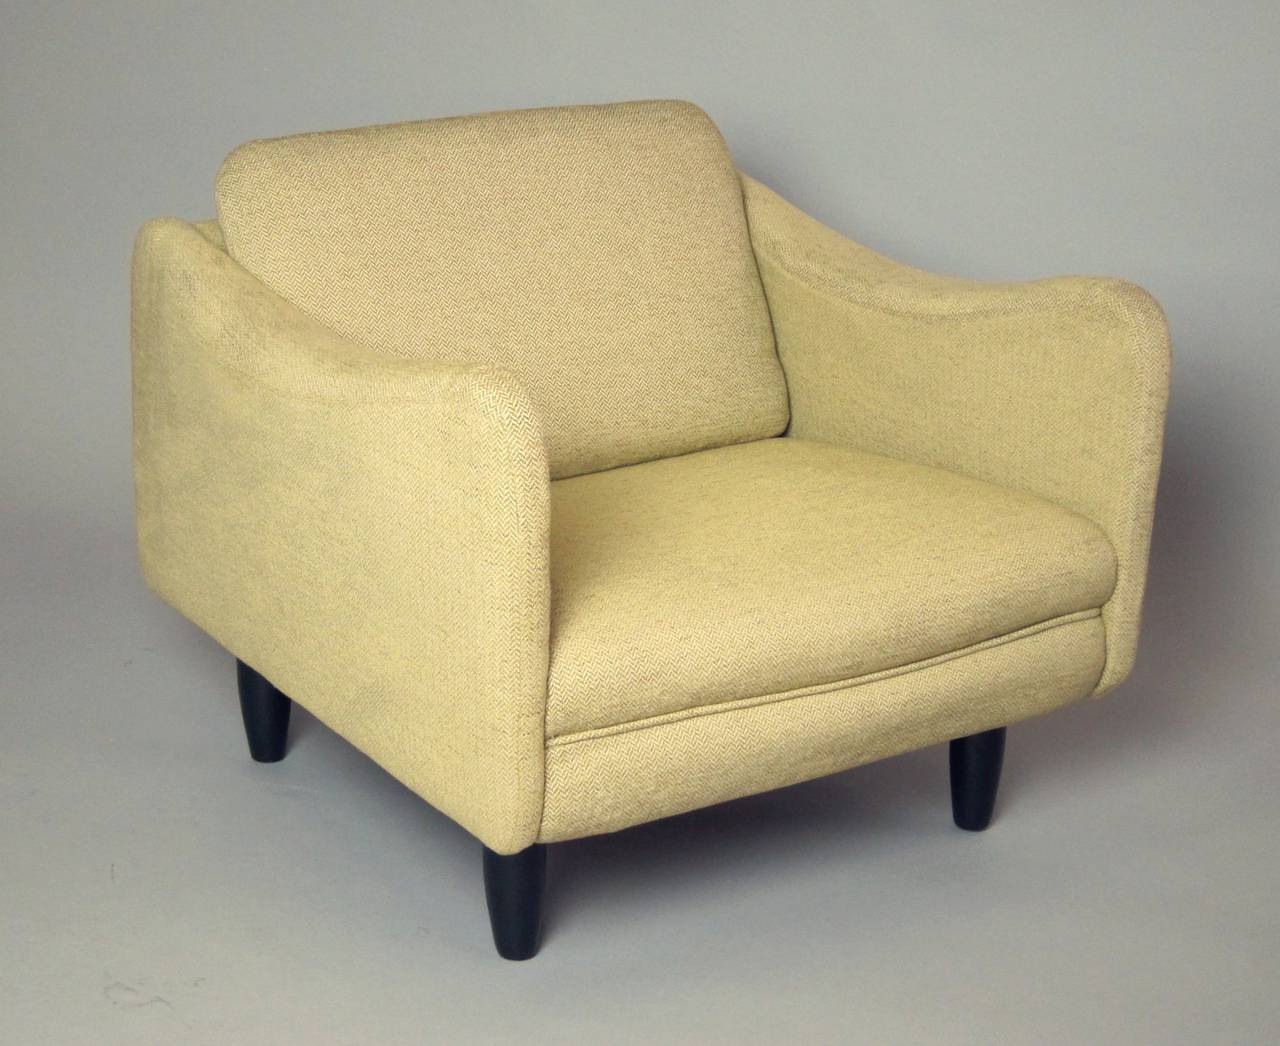 Comfortable and pure Fauteuil, designed by Michel Mortier, edited by Steiner Paris in 1963. The Armchairs have recently been re-upholstered.